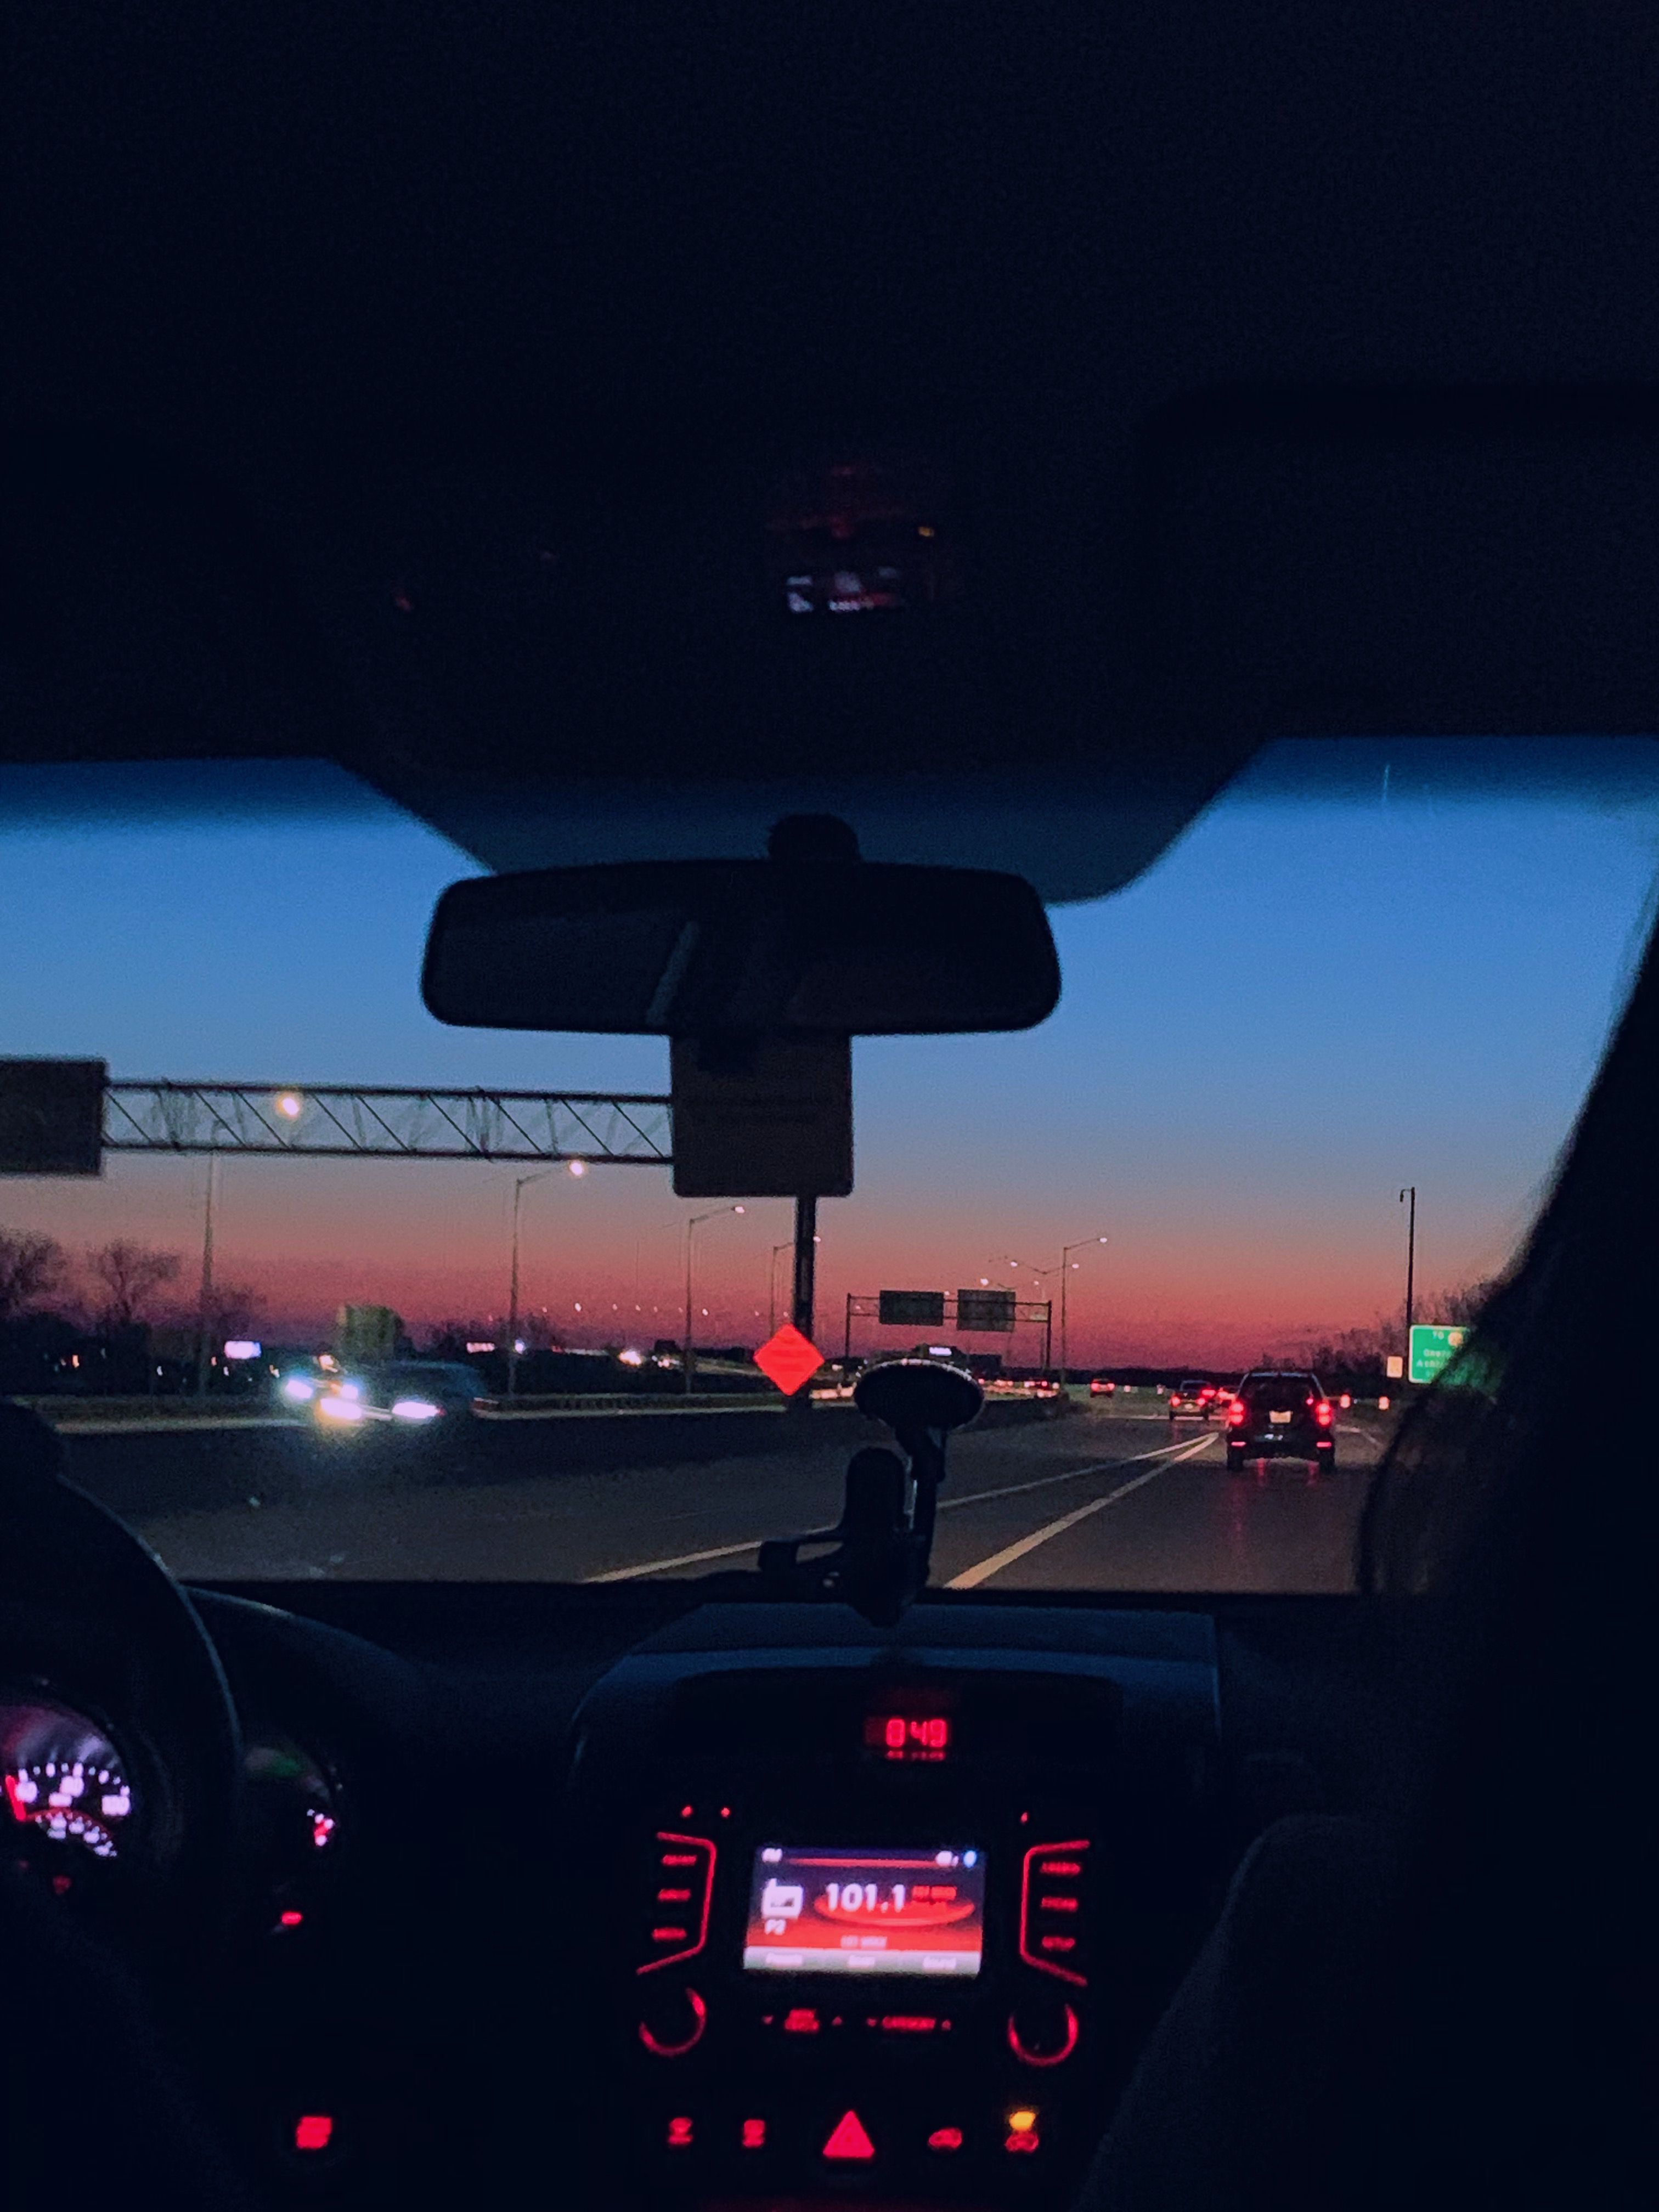 sunset #driving #aesthetic #edit #colors. Night aesthetic